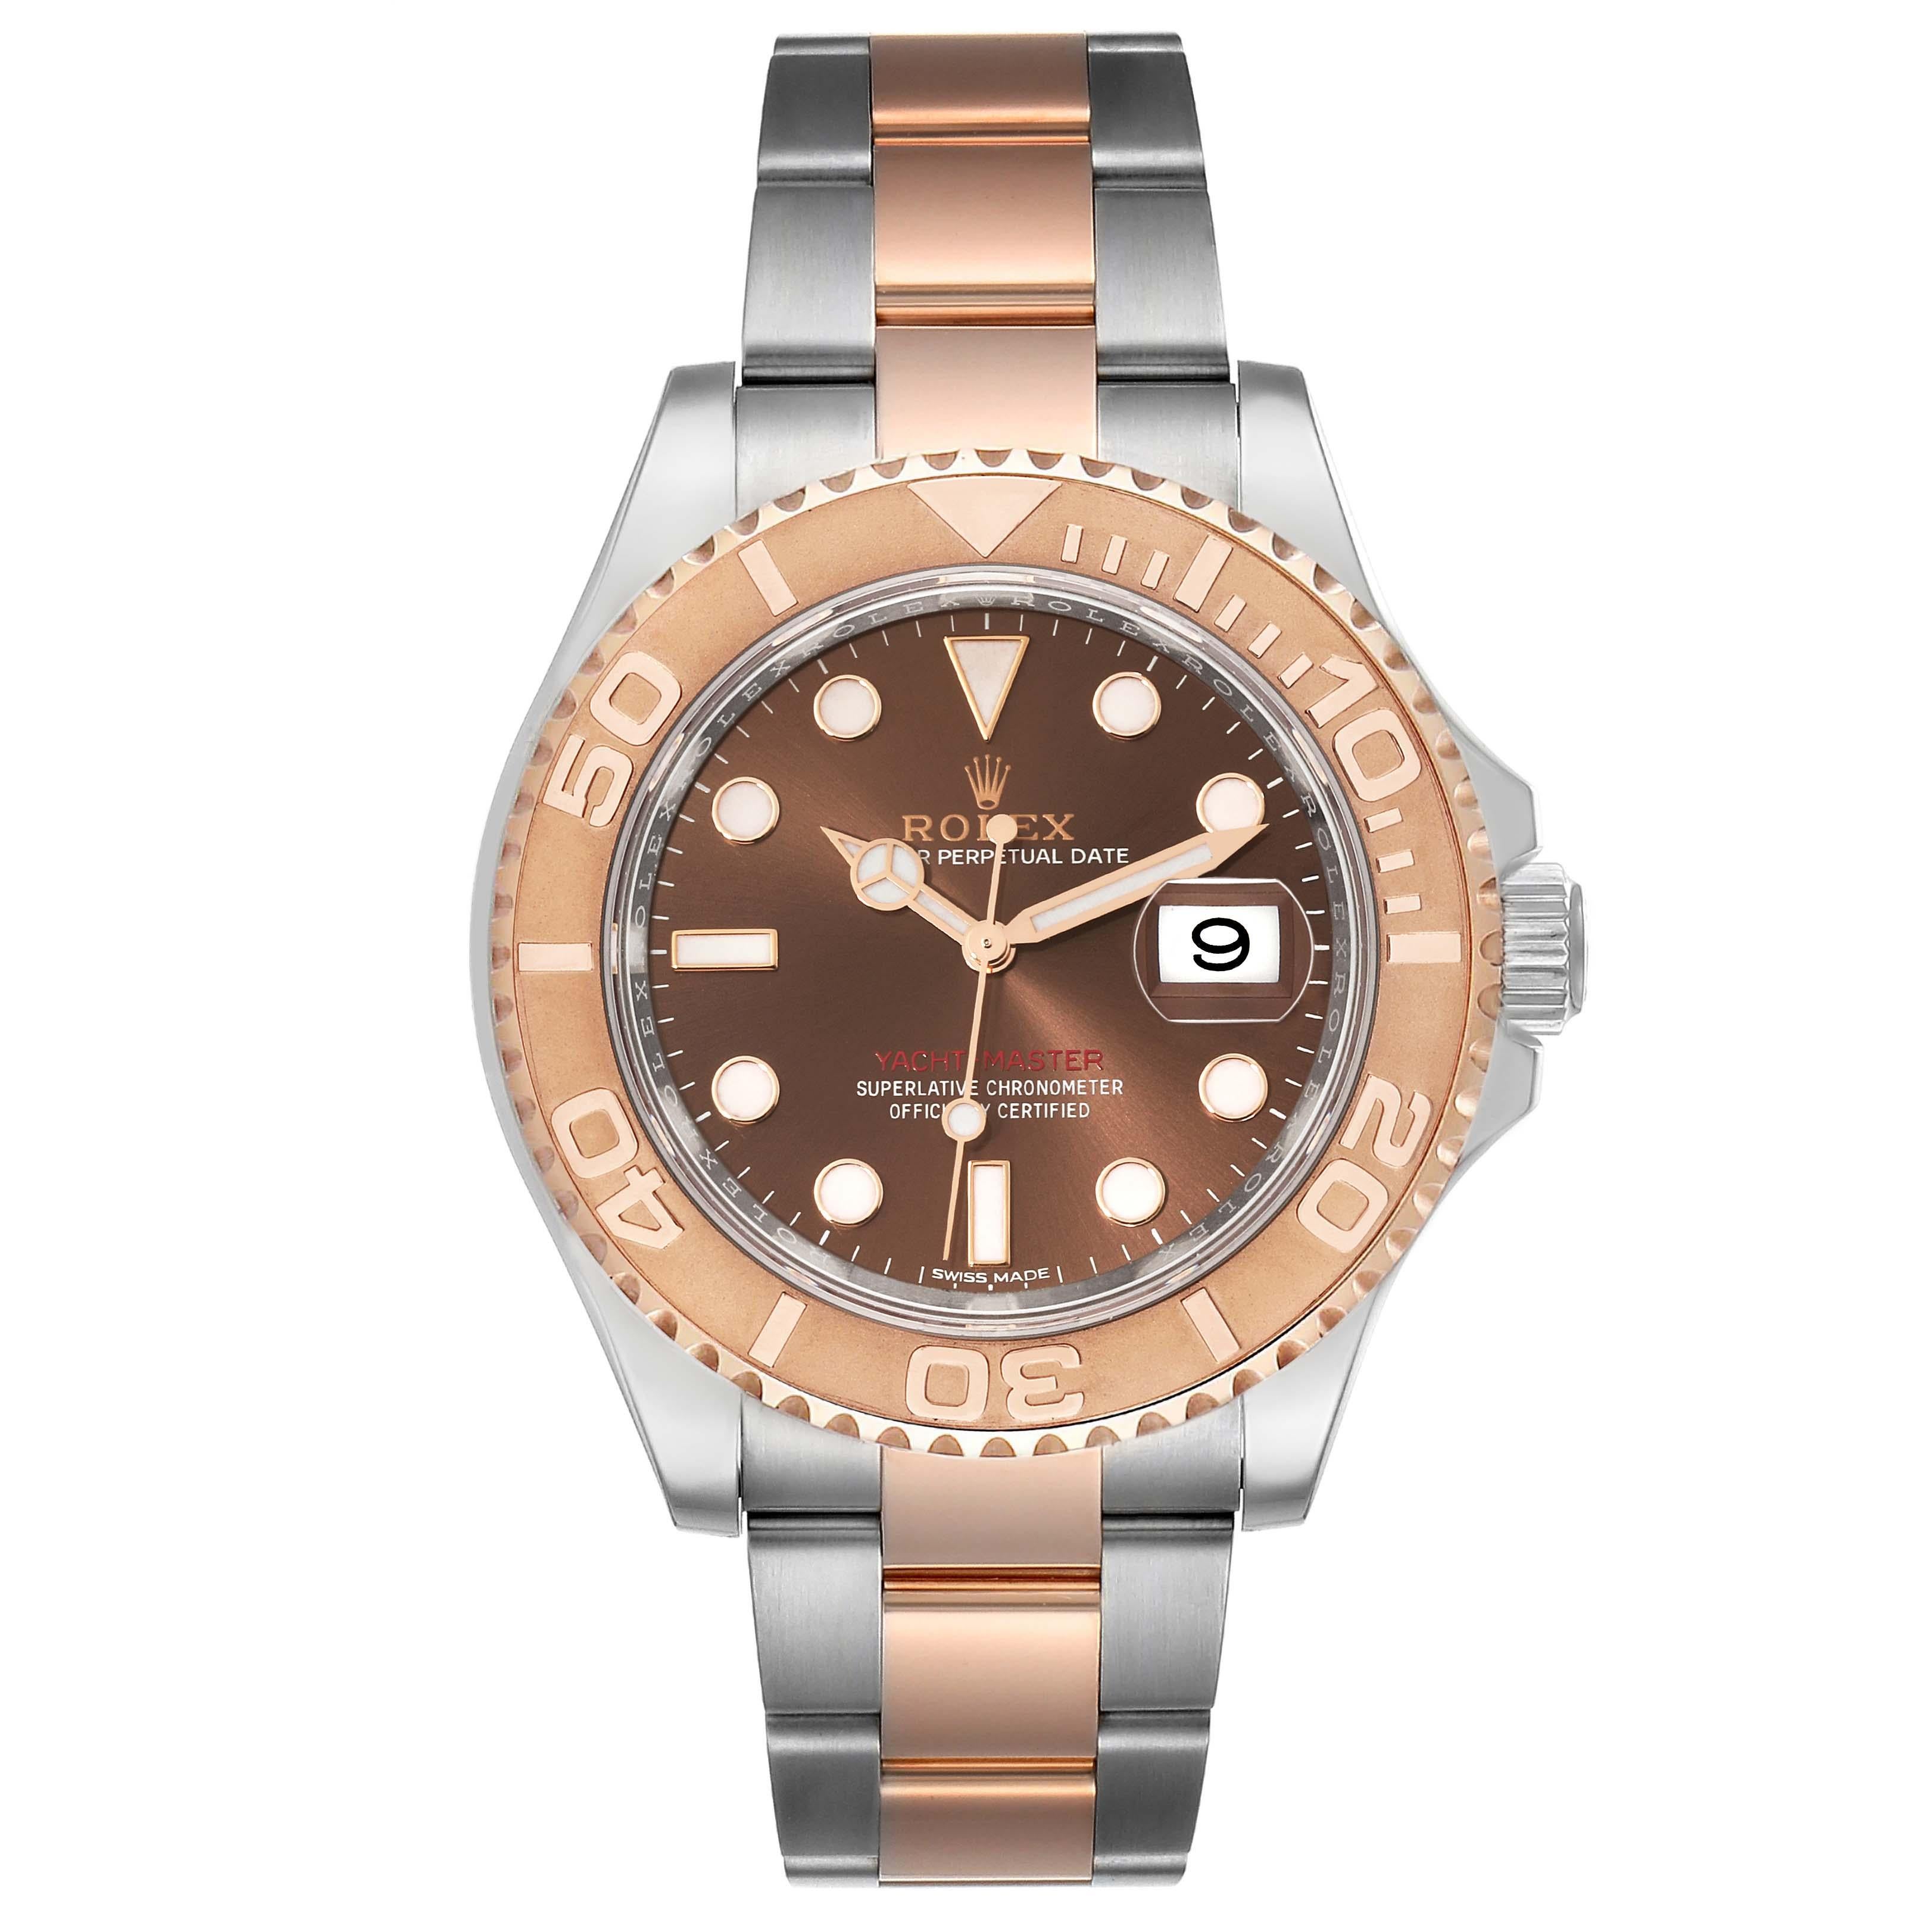 Rolex Yachtmaster 40 Rose Gold Steel Brown Dial Mens Watch 116621 Box Card. Officially certified chronometer self-winding movement. Stainless steel case 40 mm in diameter. Rolex logo on a crown. 18k rose gold special time-lapse bidirectional